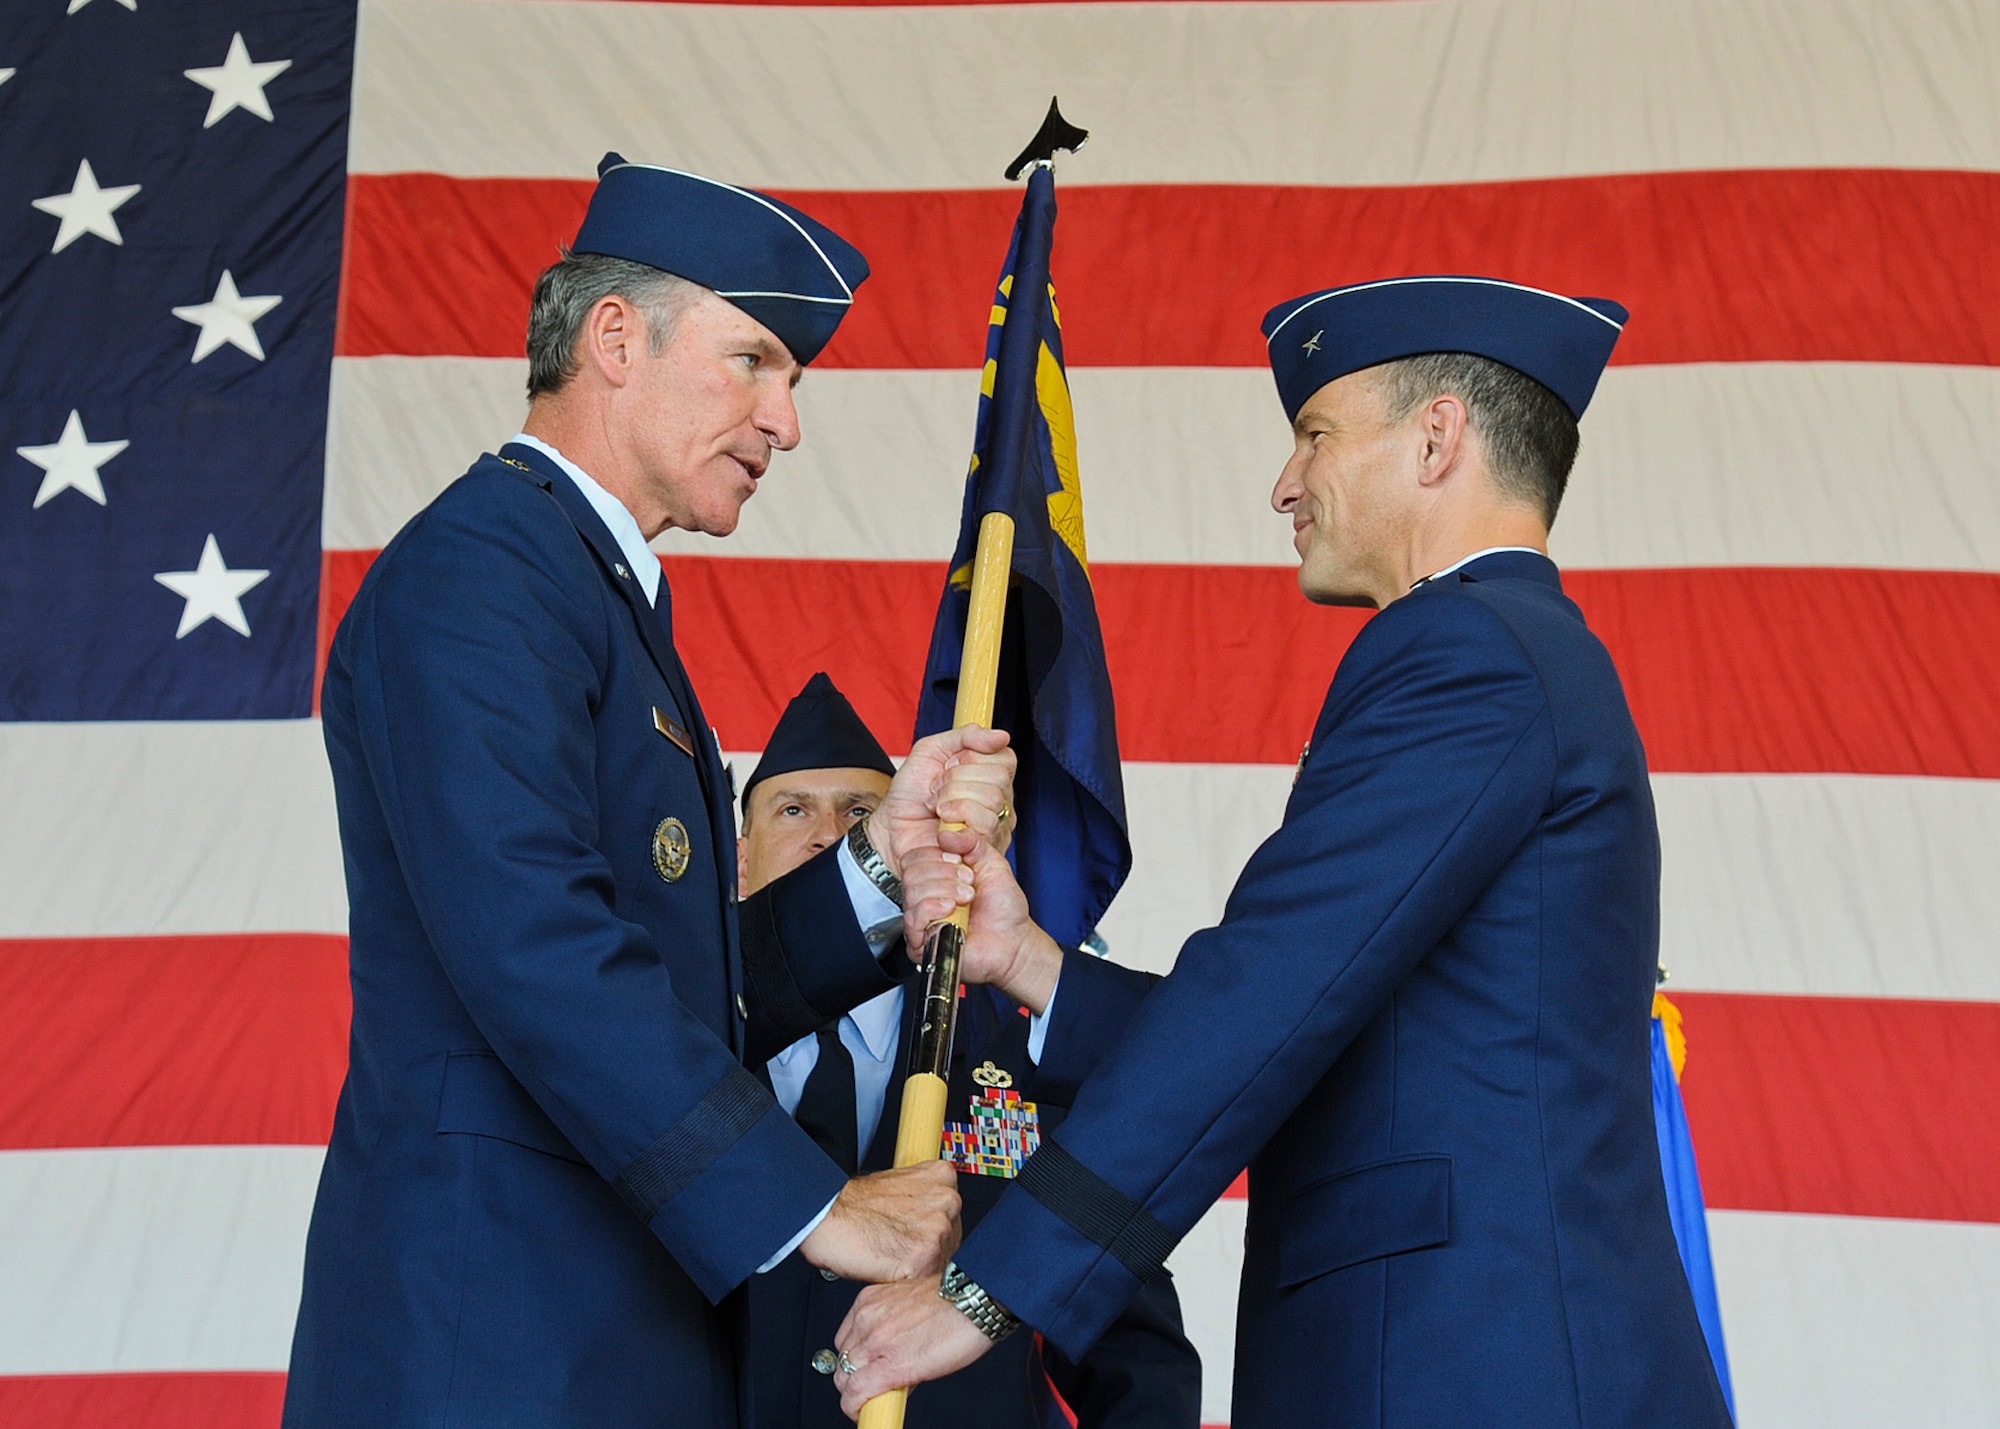 Maj. Gen. Michael Keltz, director of intelligence, operations and nuclear integration at Air Education and Training Command headquarters, passes the 56th Fighter Wing guidon to Brig. Gen. Scott Pleus, incoming 56th Fighter Wing commander, during a change-of-command ceremony at Luke Air Force Base on June 20. Pleus, an F-16 command pilot with more than 2,300 flying hours including combat time in operations Desert Fox and Southern Watch, comes to Luke from the Pentagon, where he served as executive officer to the chief of staff of the Air Force. (U.S. Air Force photo/Staff Sgt. Darlene Setlmann)